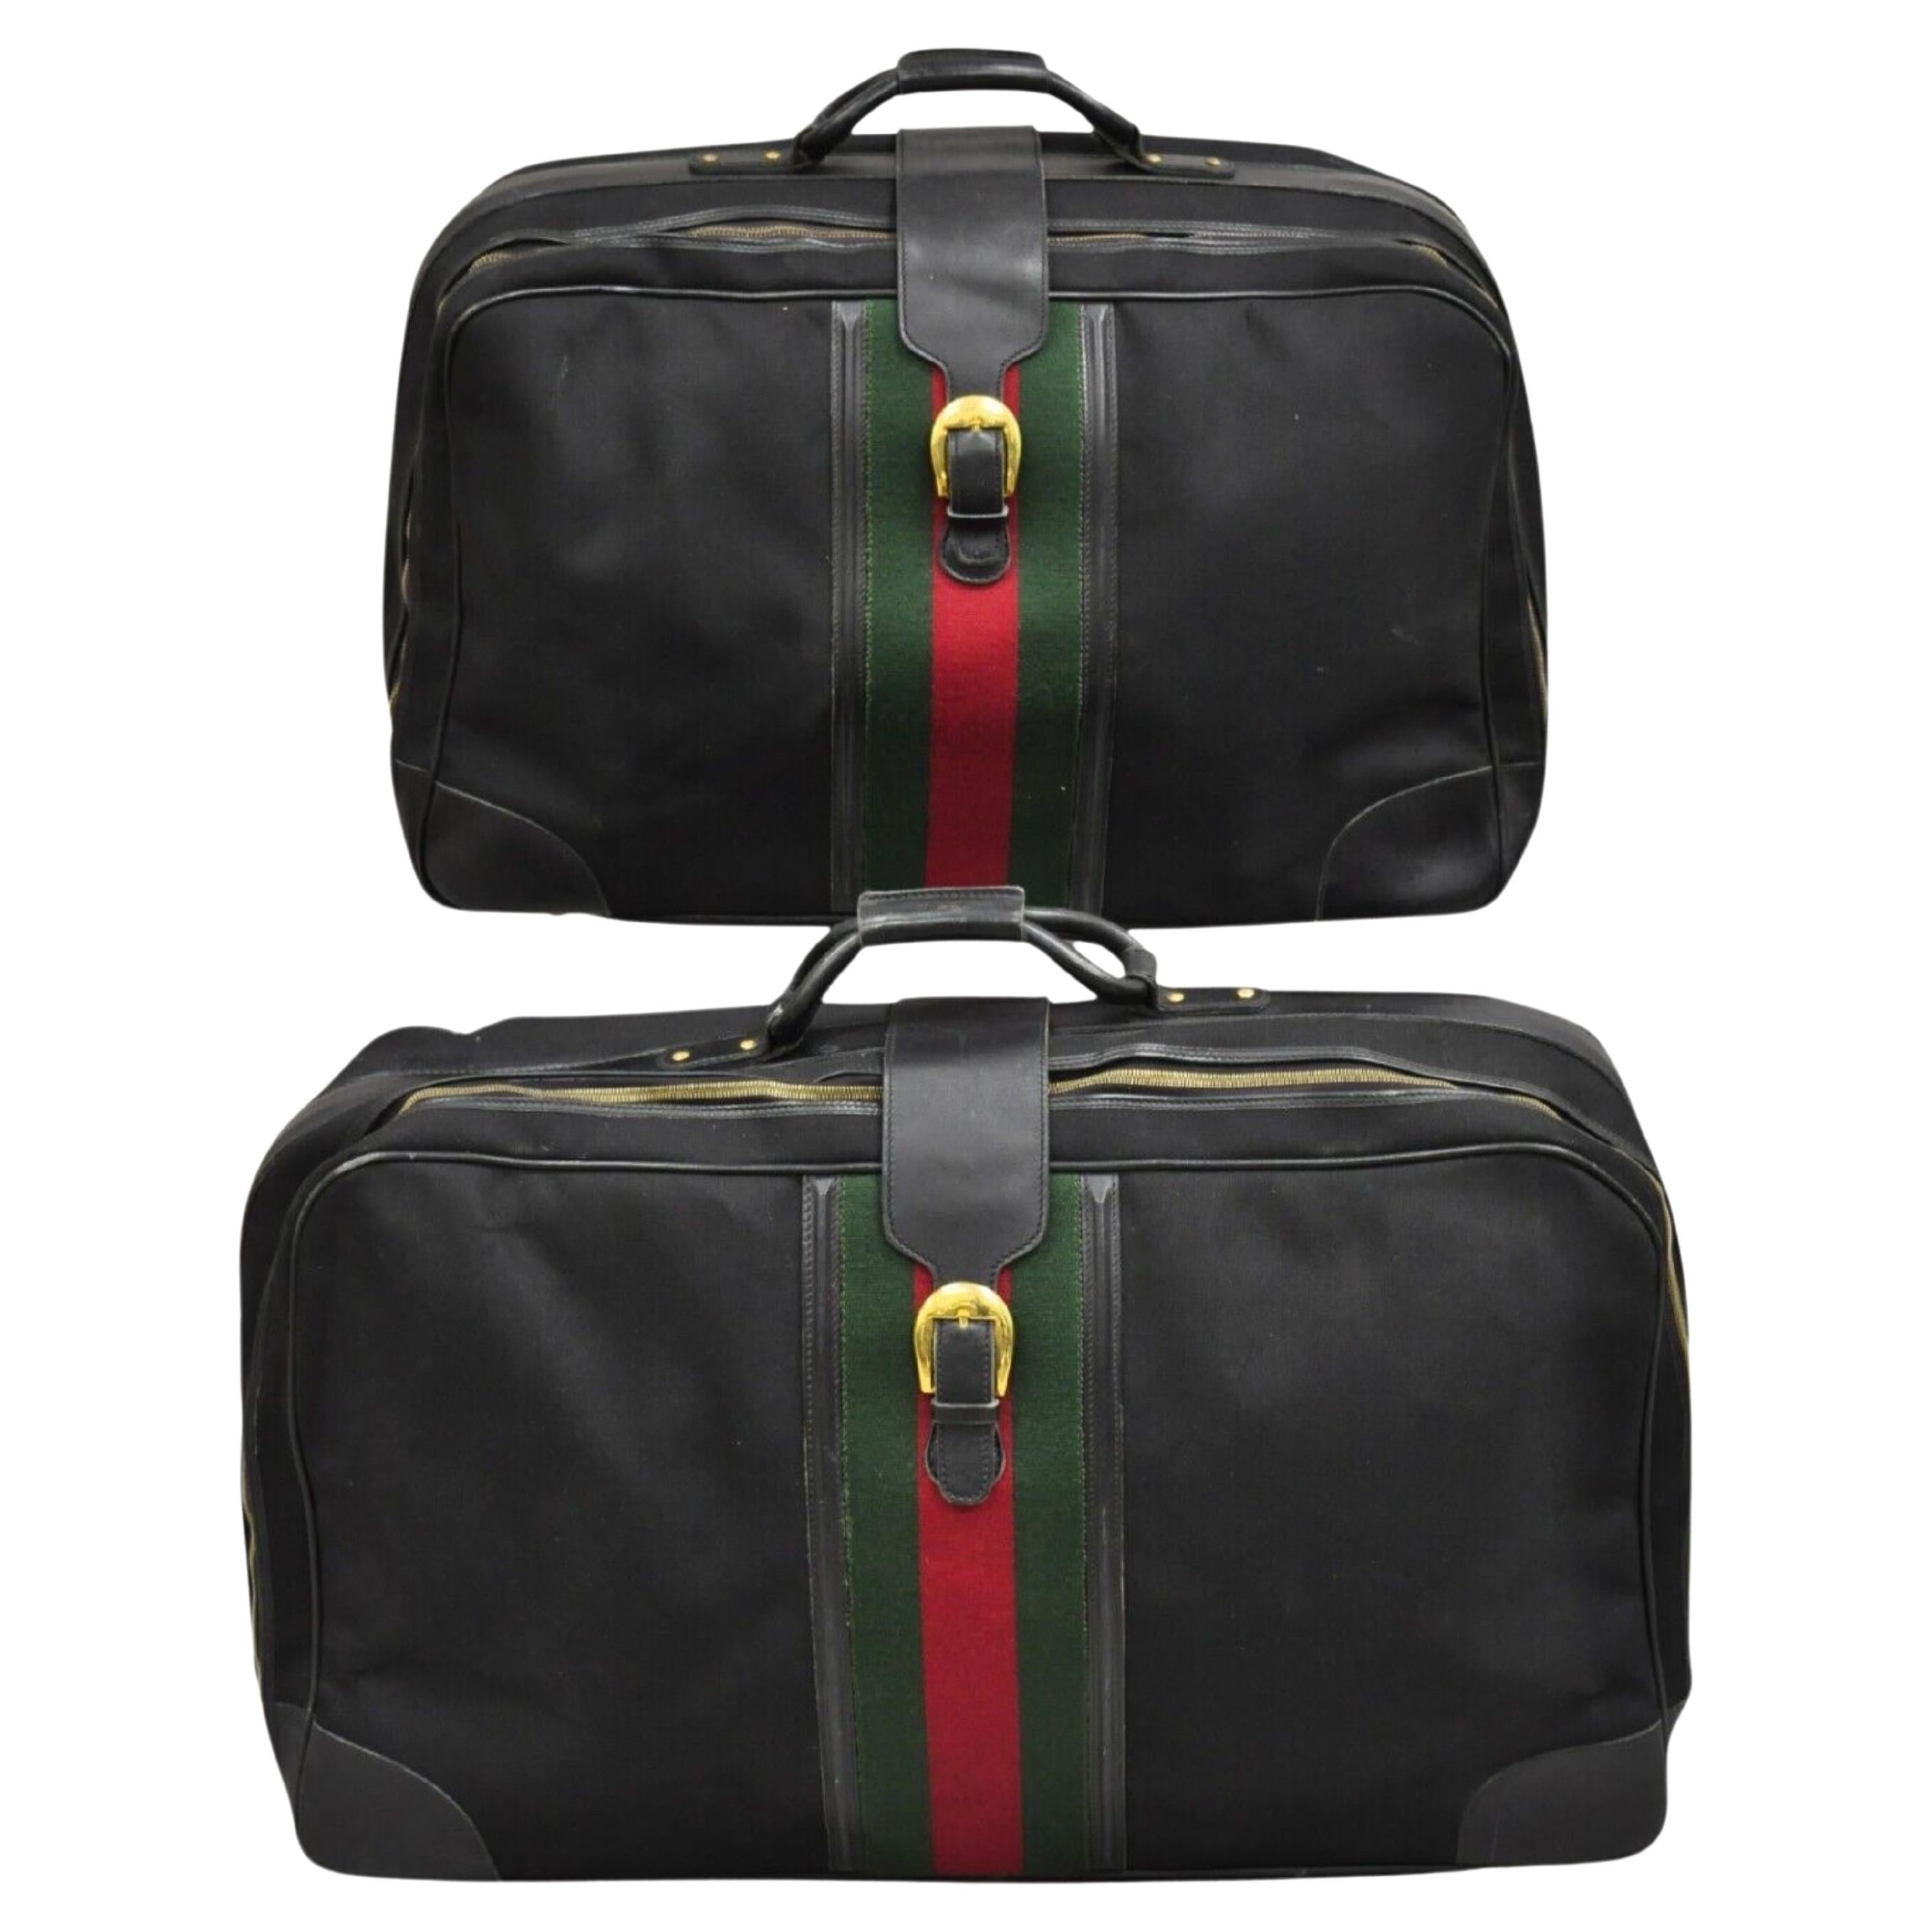 Vintage Gucci Black Canvas & Leather Suitcase Luggage His and Hers Set -2 Pc (B) For Sale